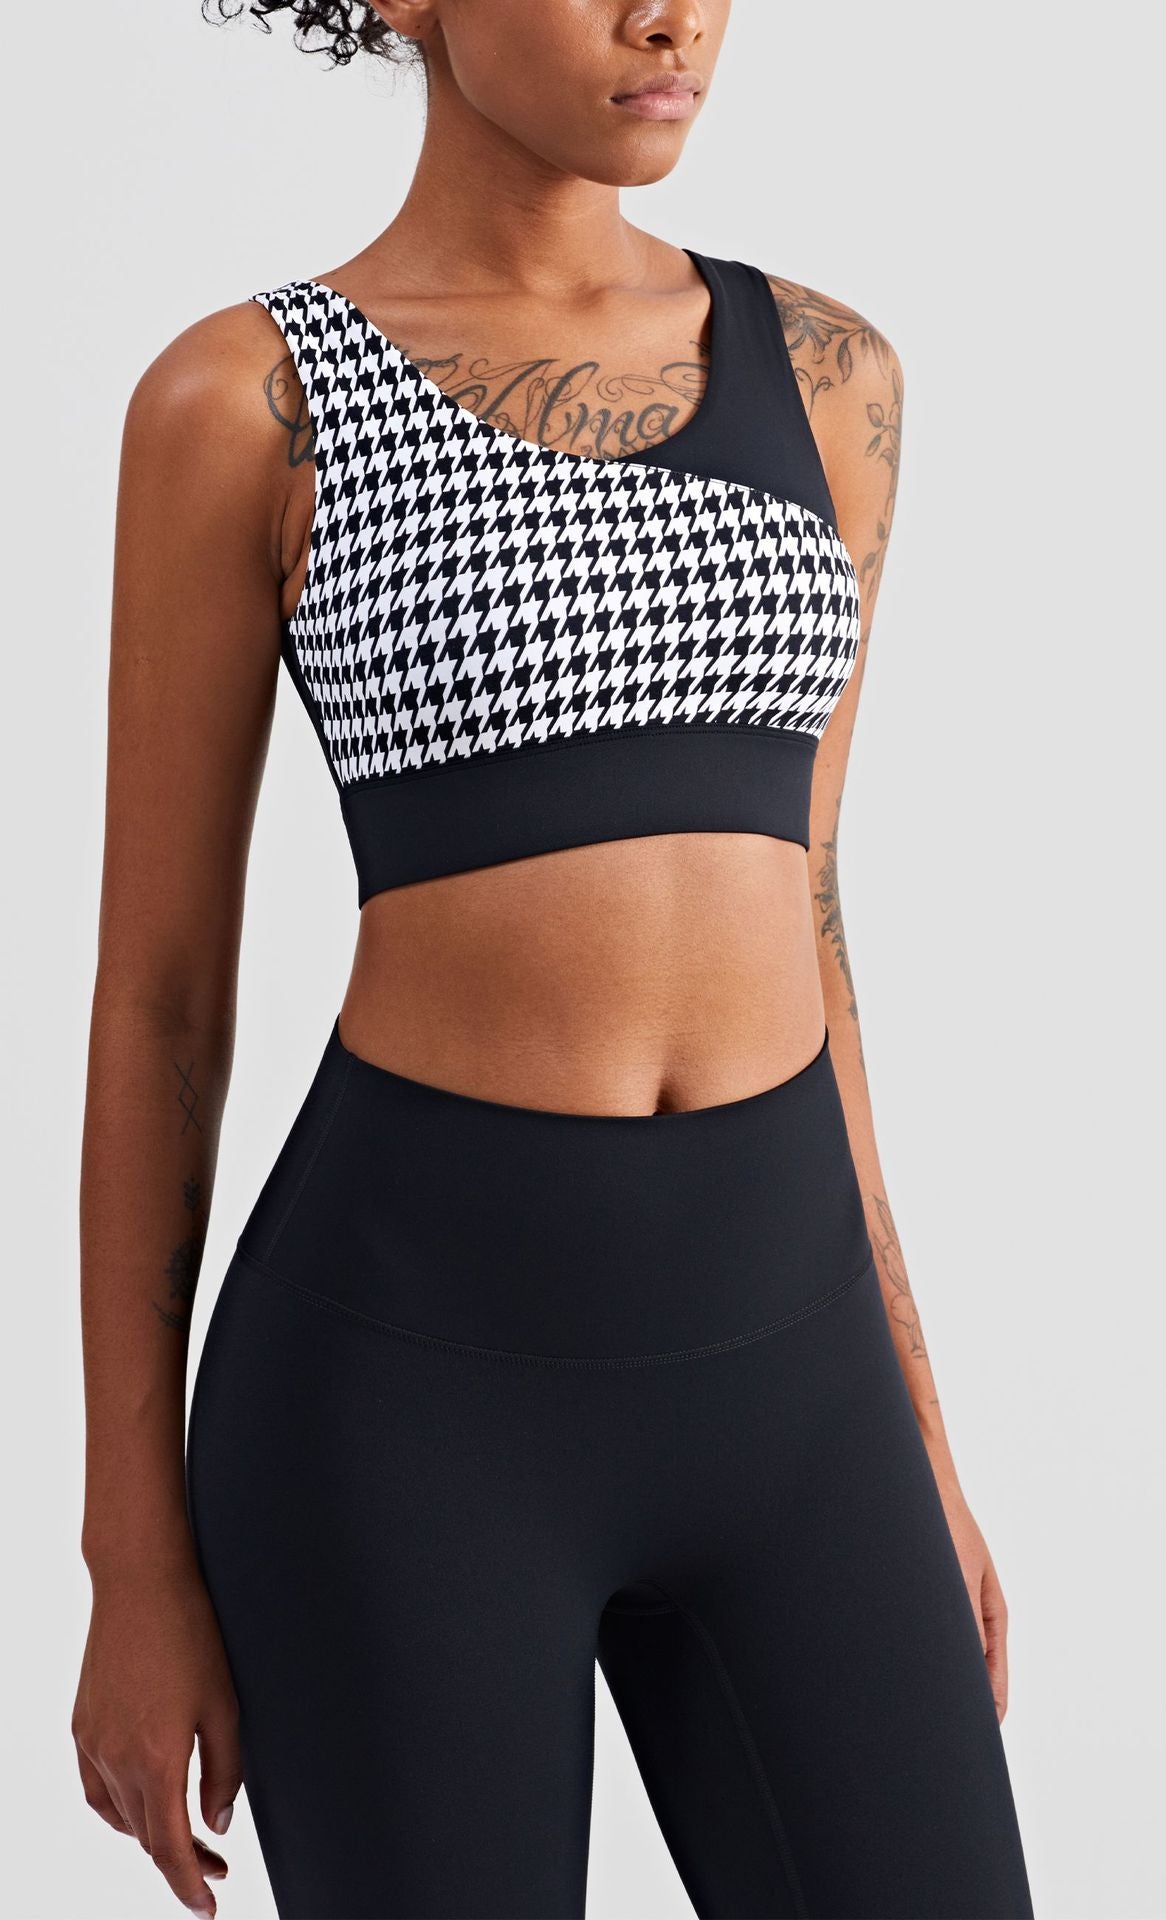 Houndstooth Nude Yoga Suit